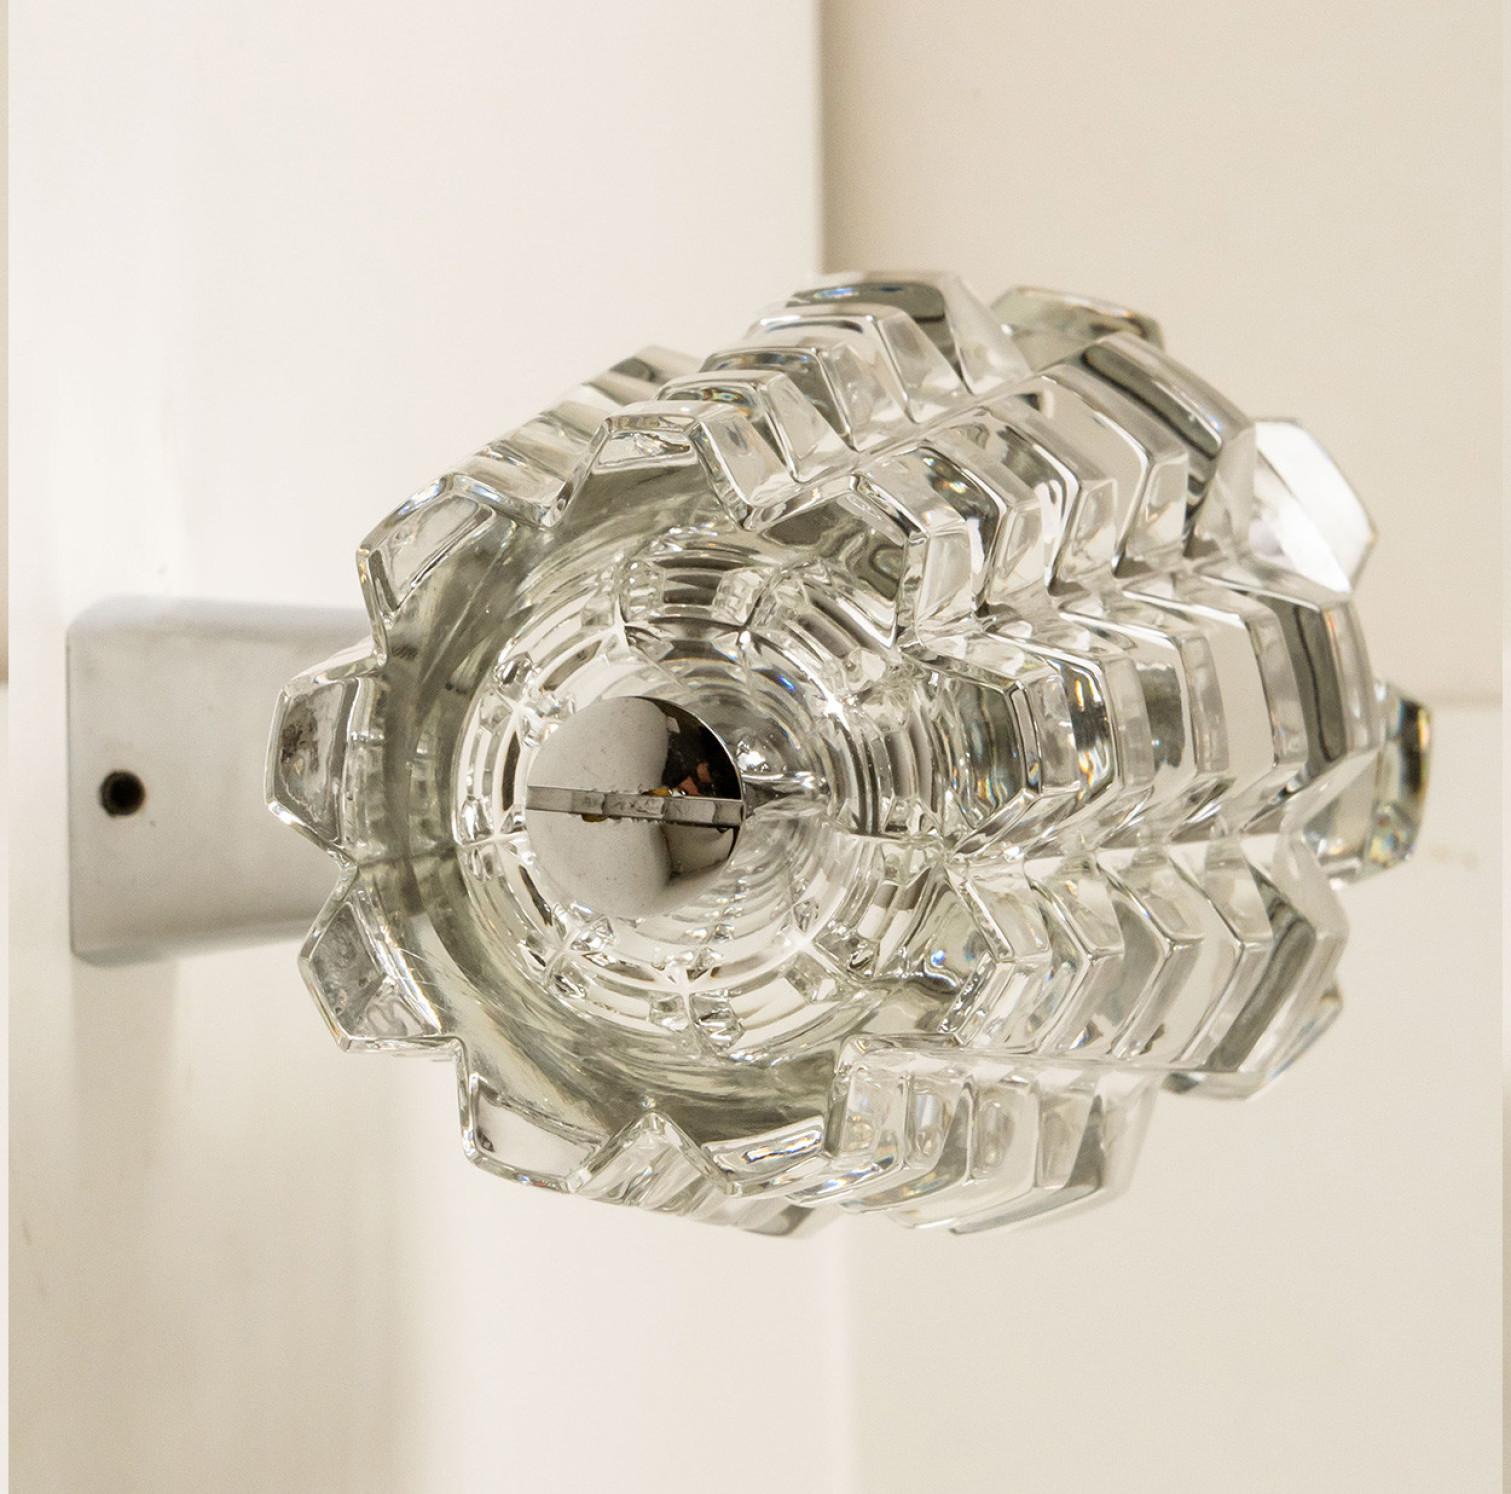 Glass Hourglass Shaped Chrome Wallsconce, France, Europe, 1970s For Sale